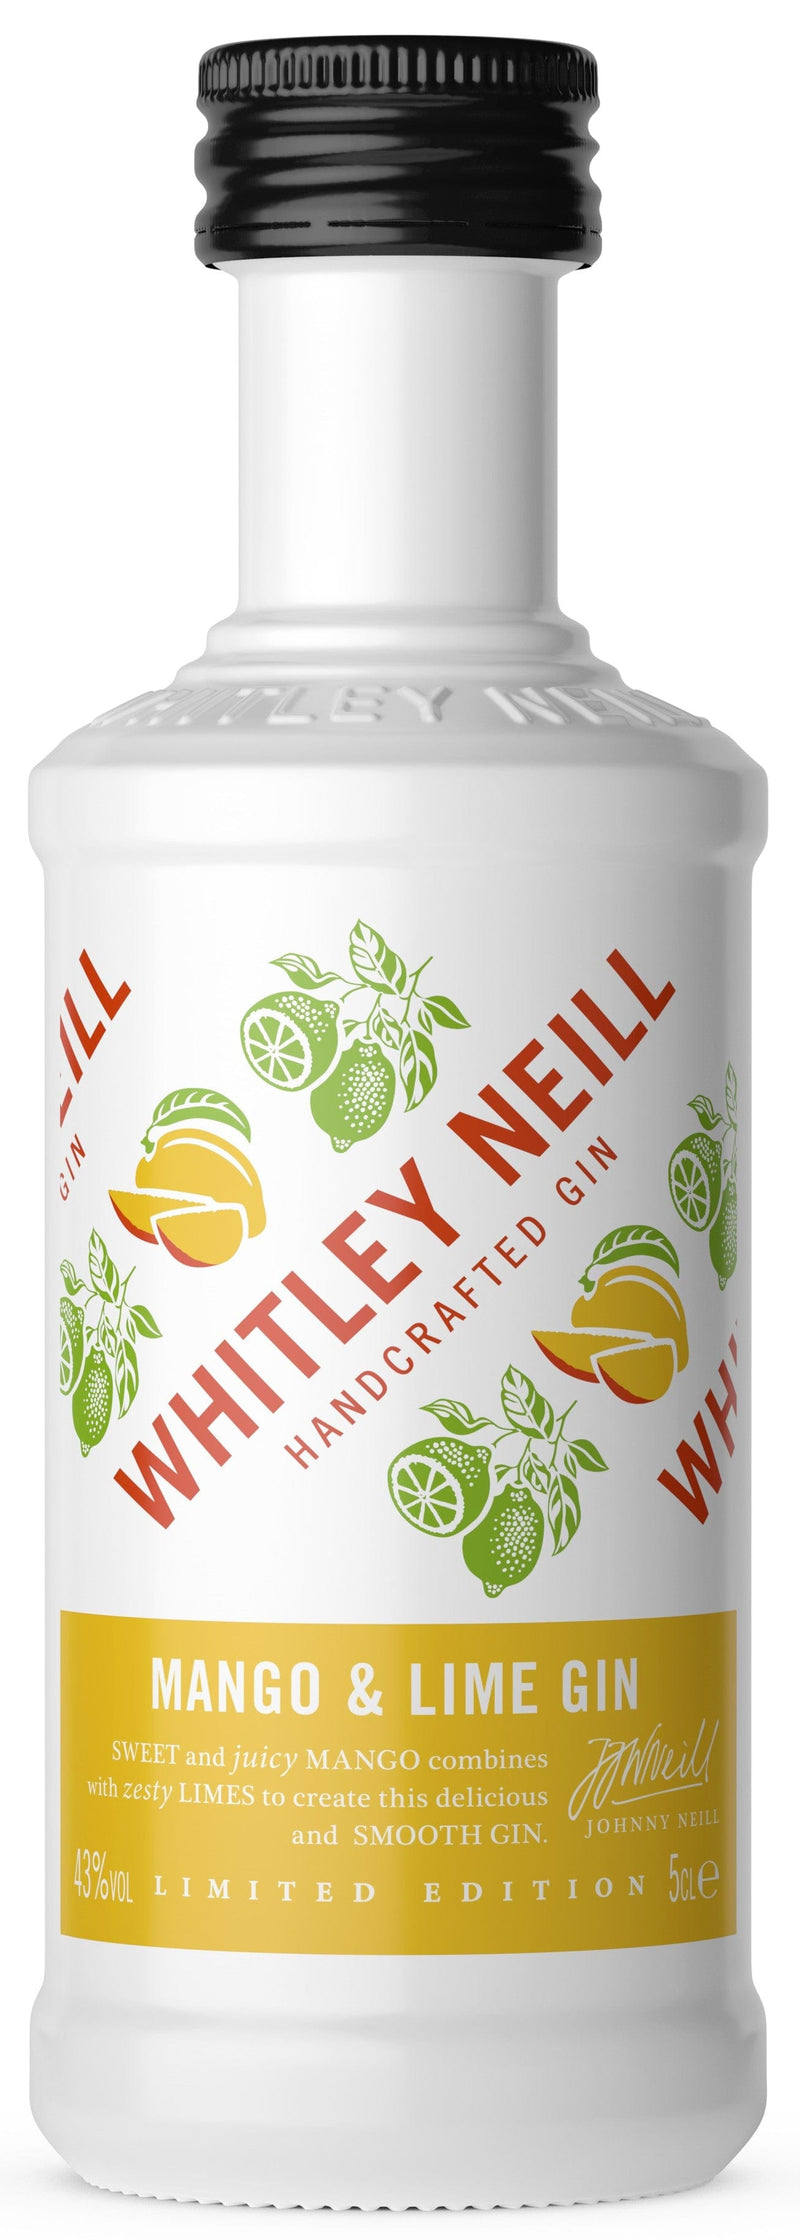 Whitley Neill Mango and Lime Gin Miniature 5cl